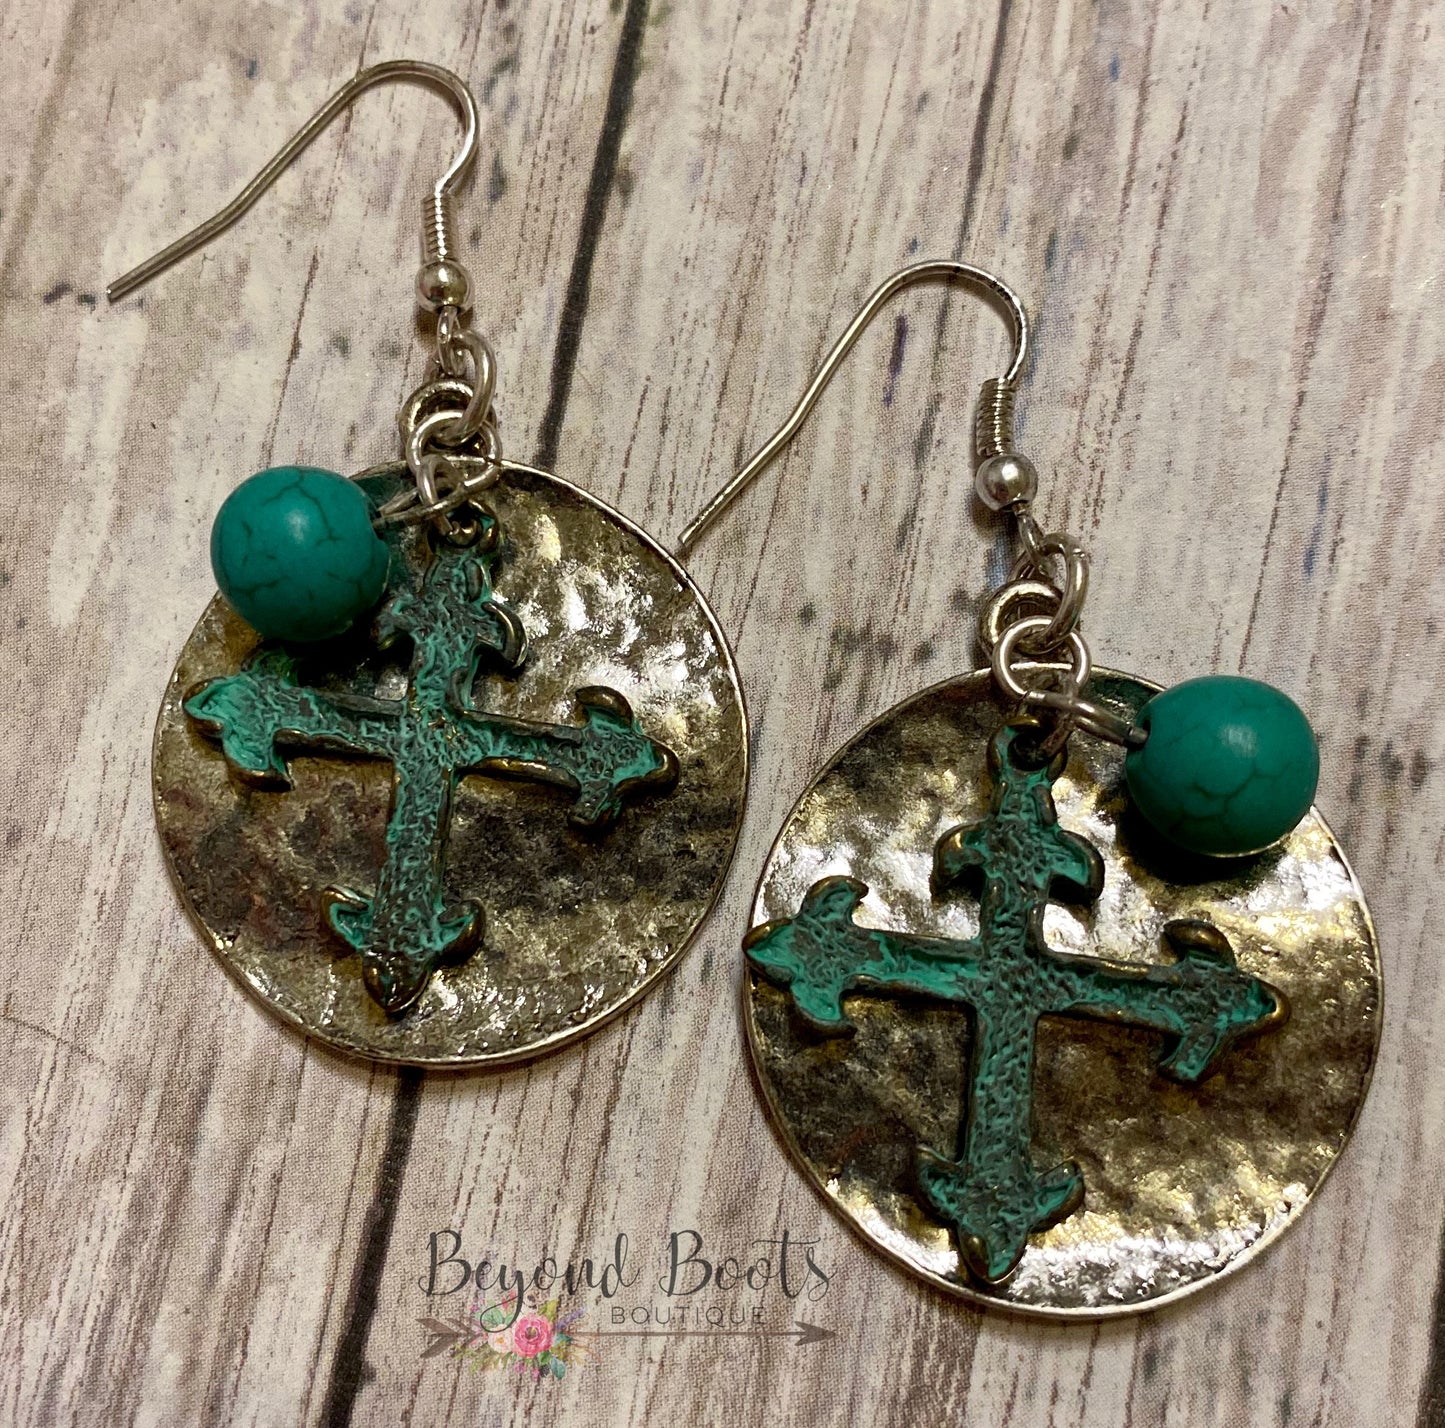 Round Silver & Teal Cross Charm Earrings